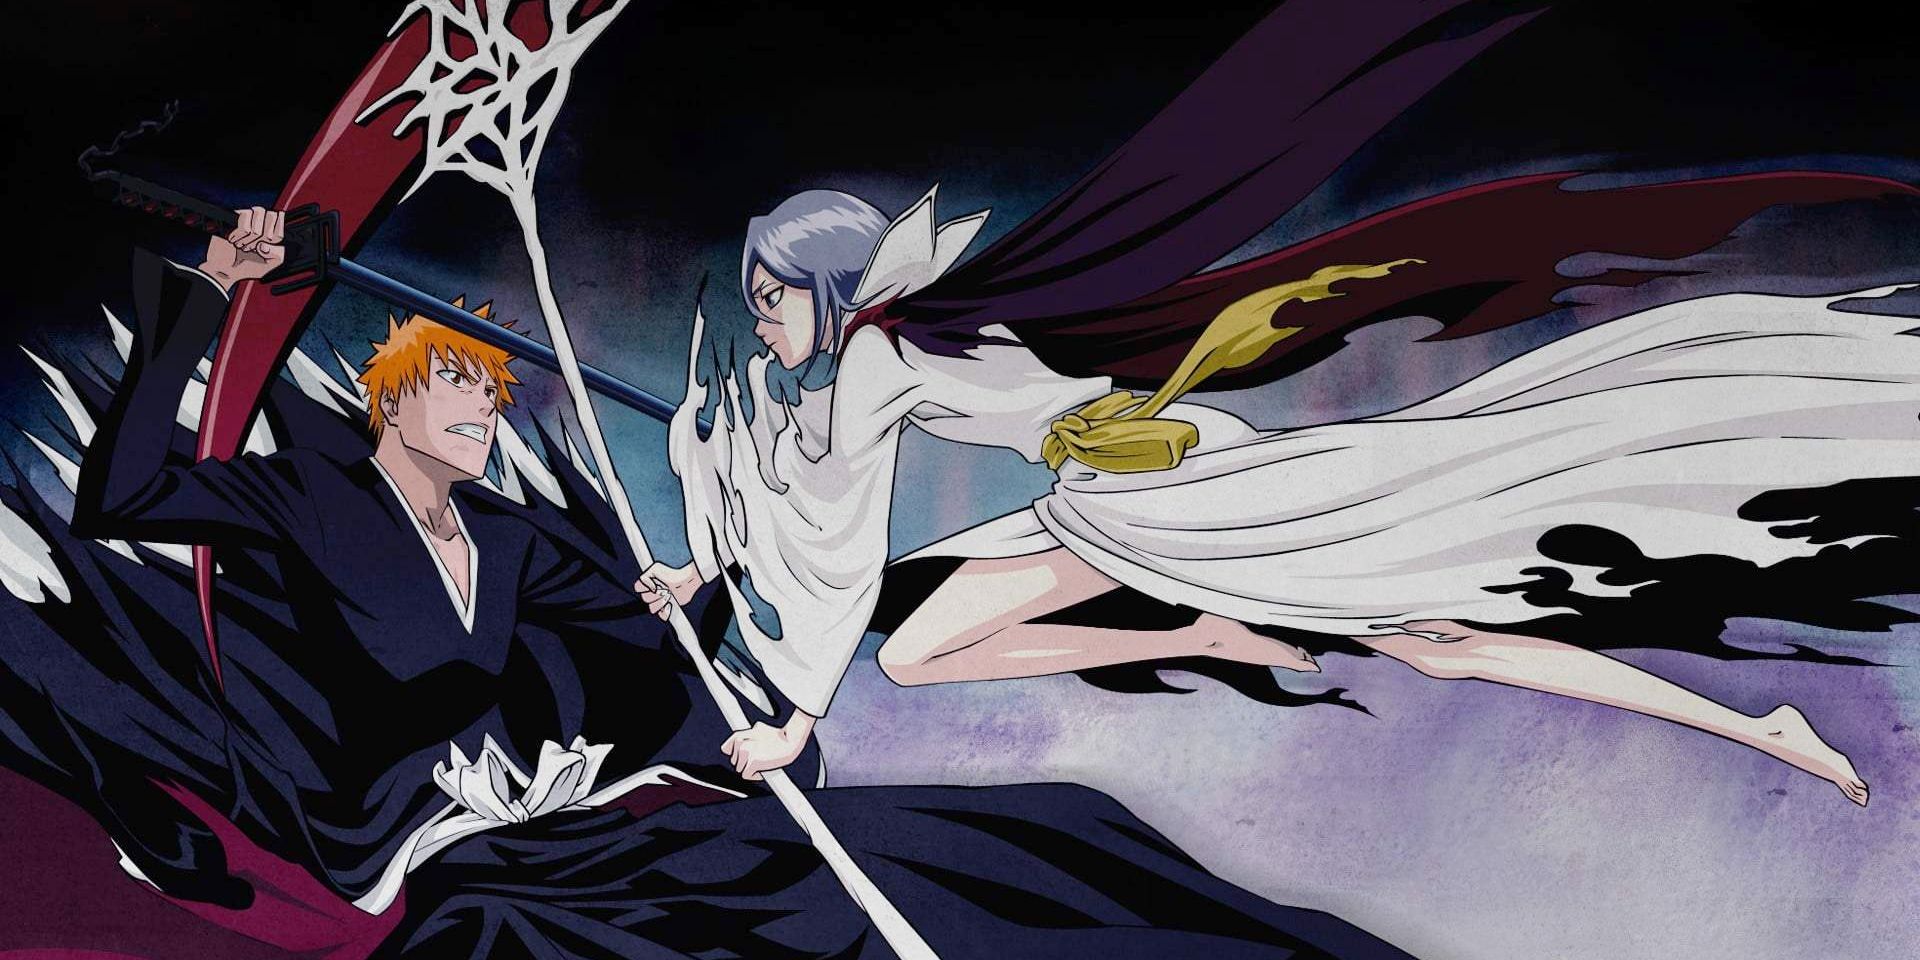 fight scene from the bleach anime where two of the main characters fight